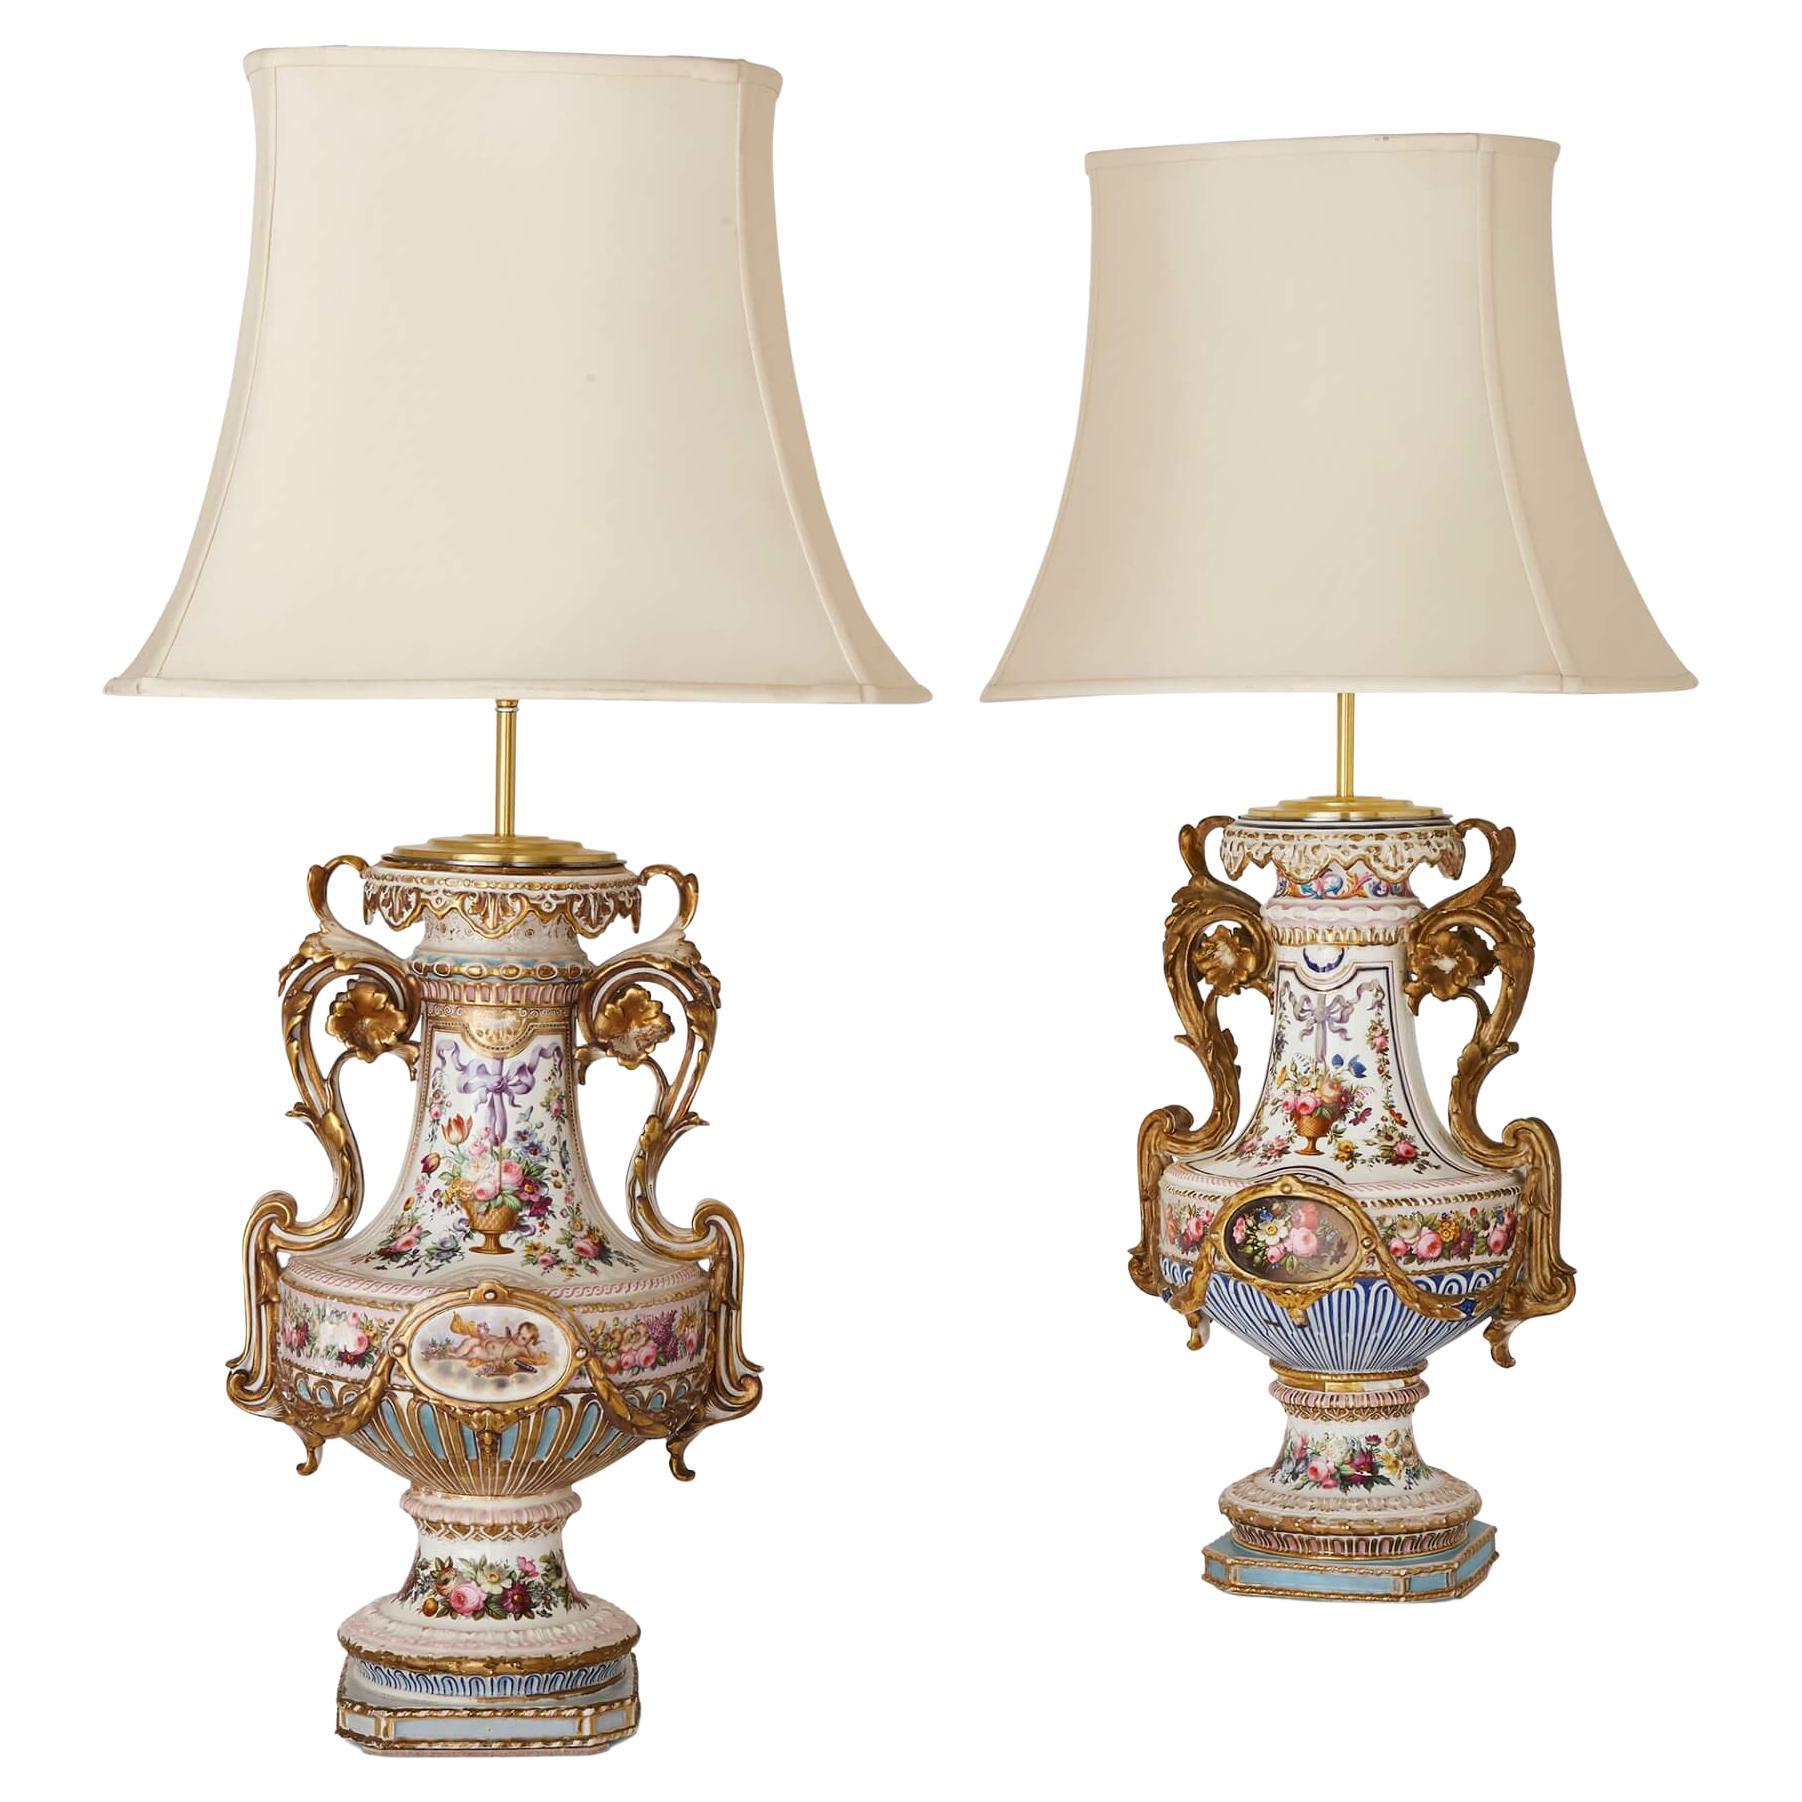 Pair of Antique Florally Decorated Porcelain Lamps For Sale